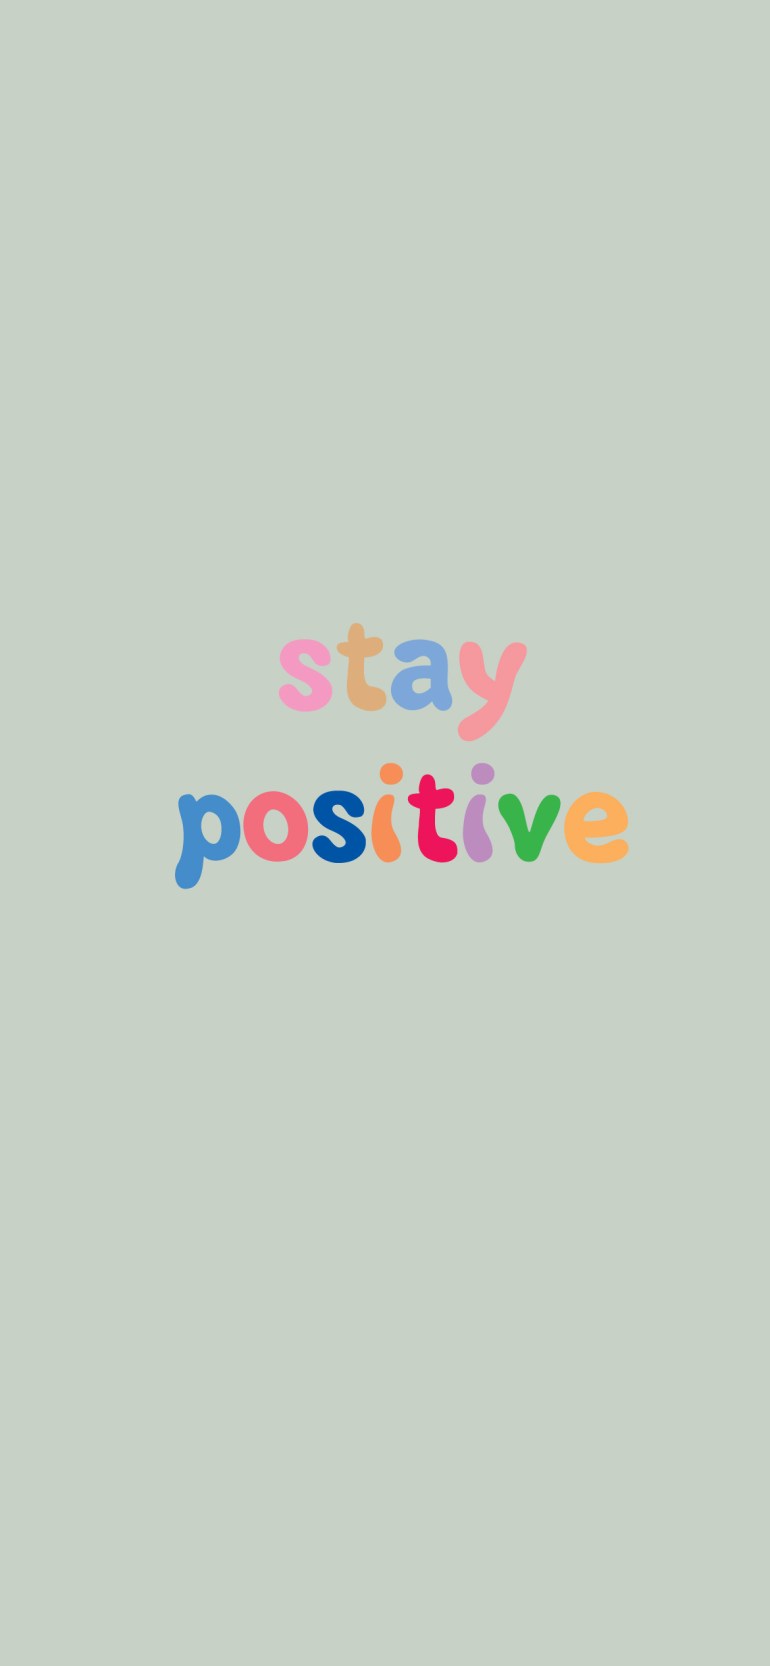 Stay positive wallpaper by kristen leigh - IPhone, simple, quotes, positive, boho, couple